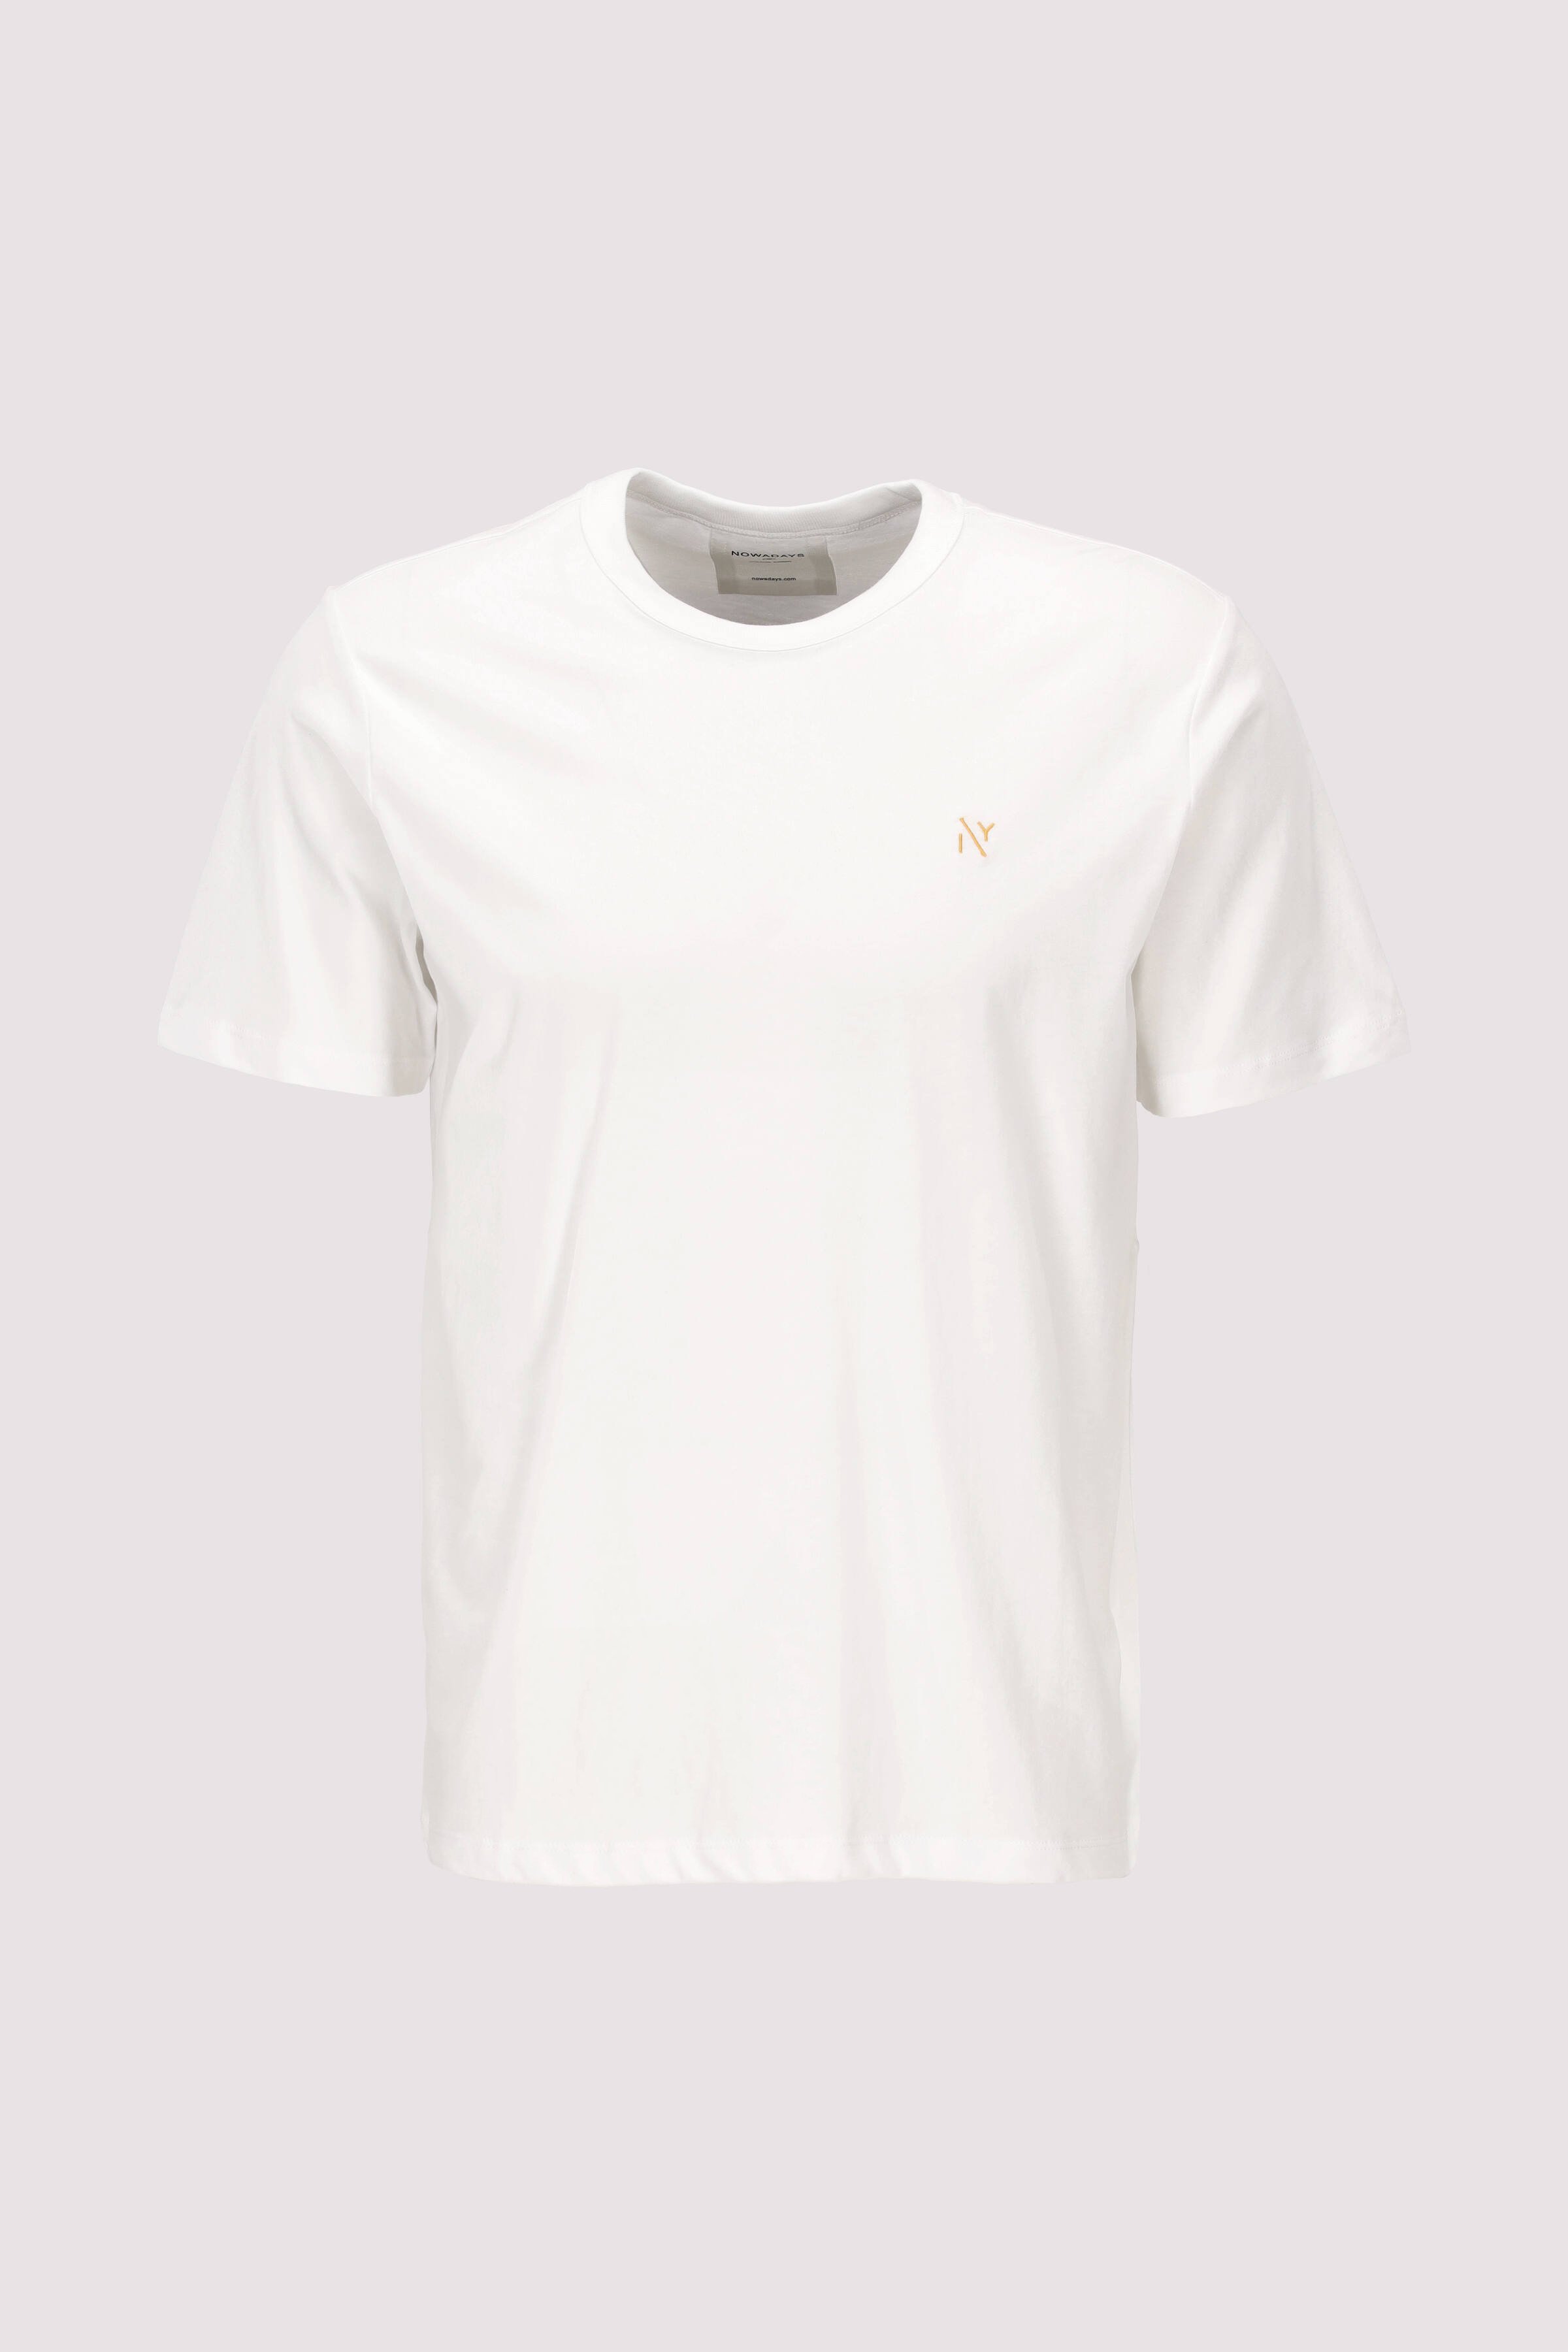 The Peached T-Shirt